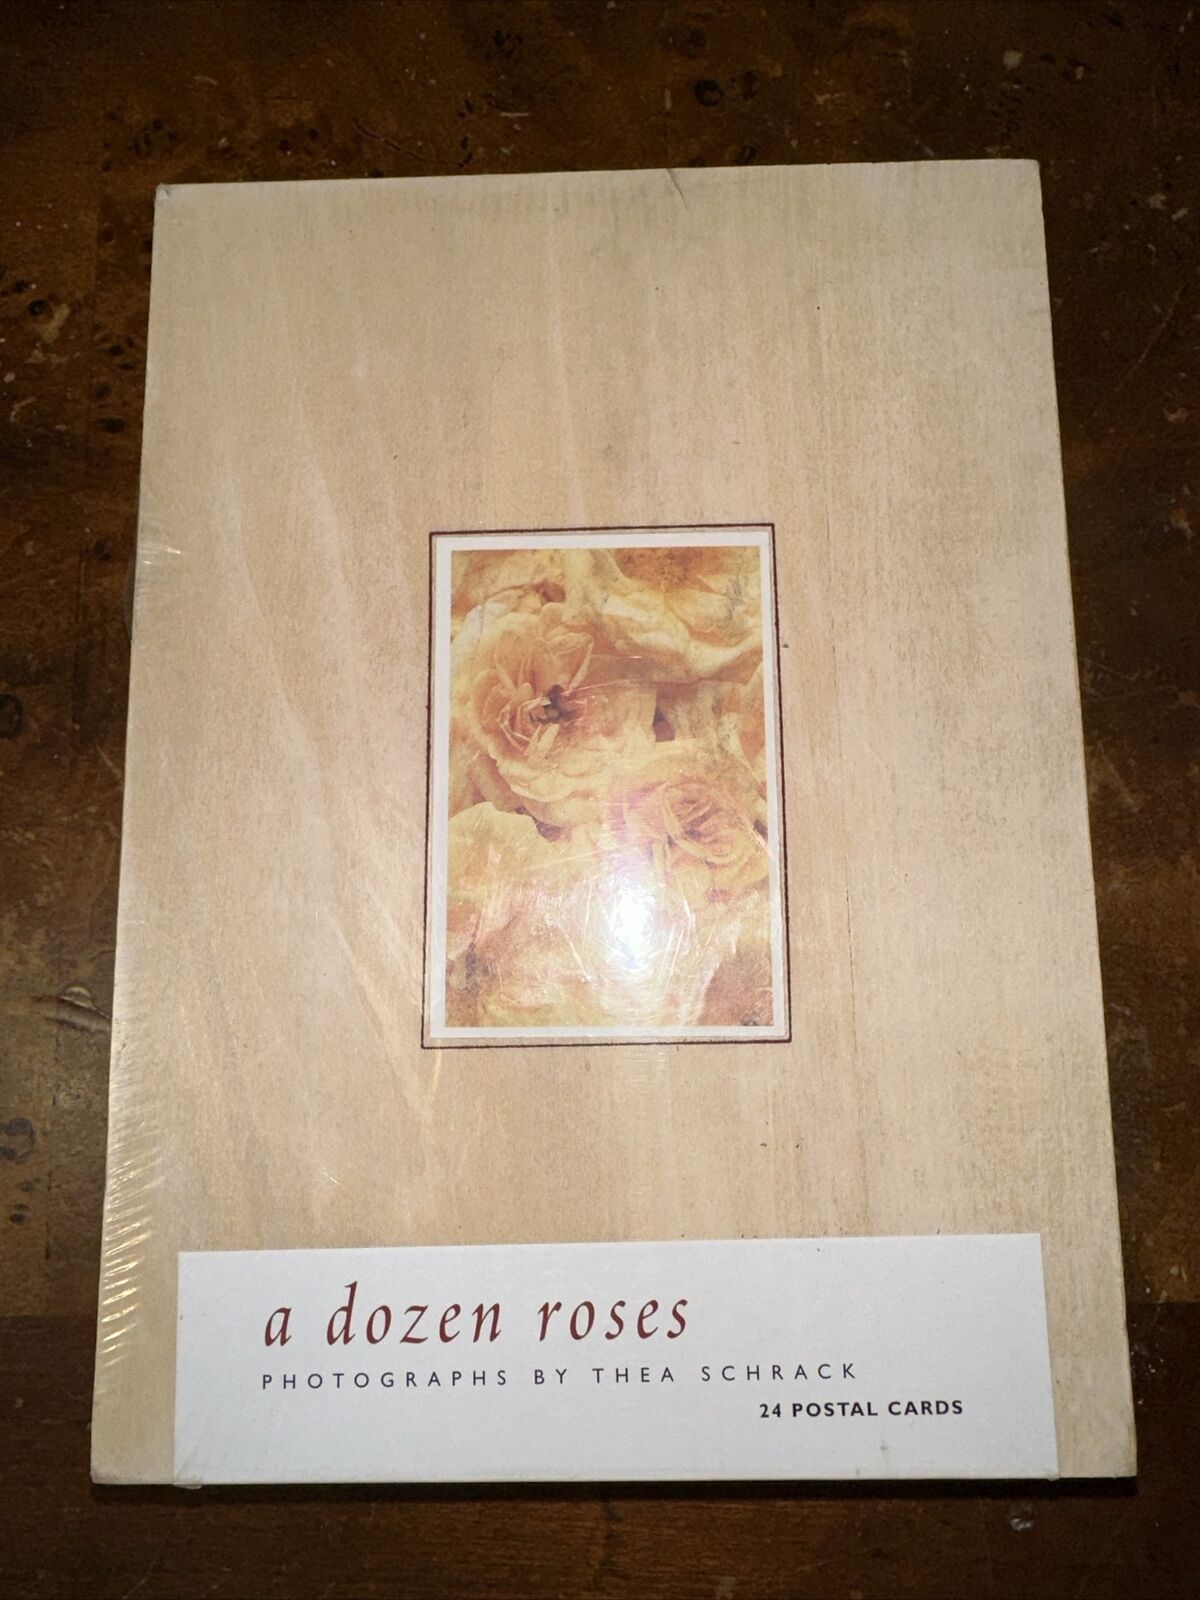 “A Dozen Roses” Photographs By Thea Schrack 24 Postal Cards w/ Wood Box Sealed